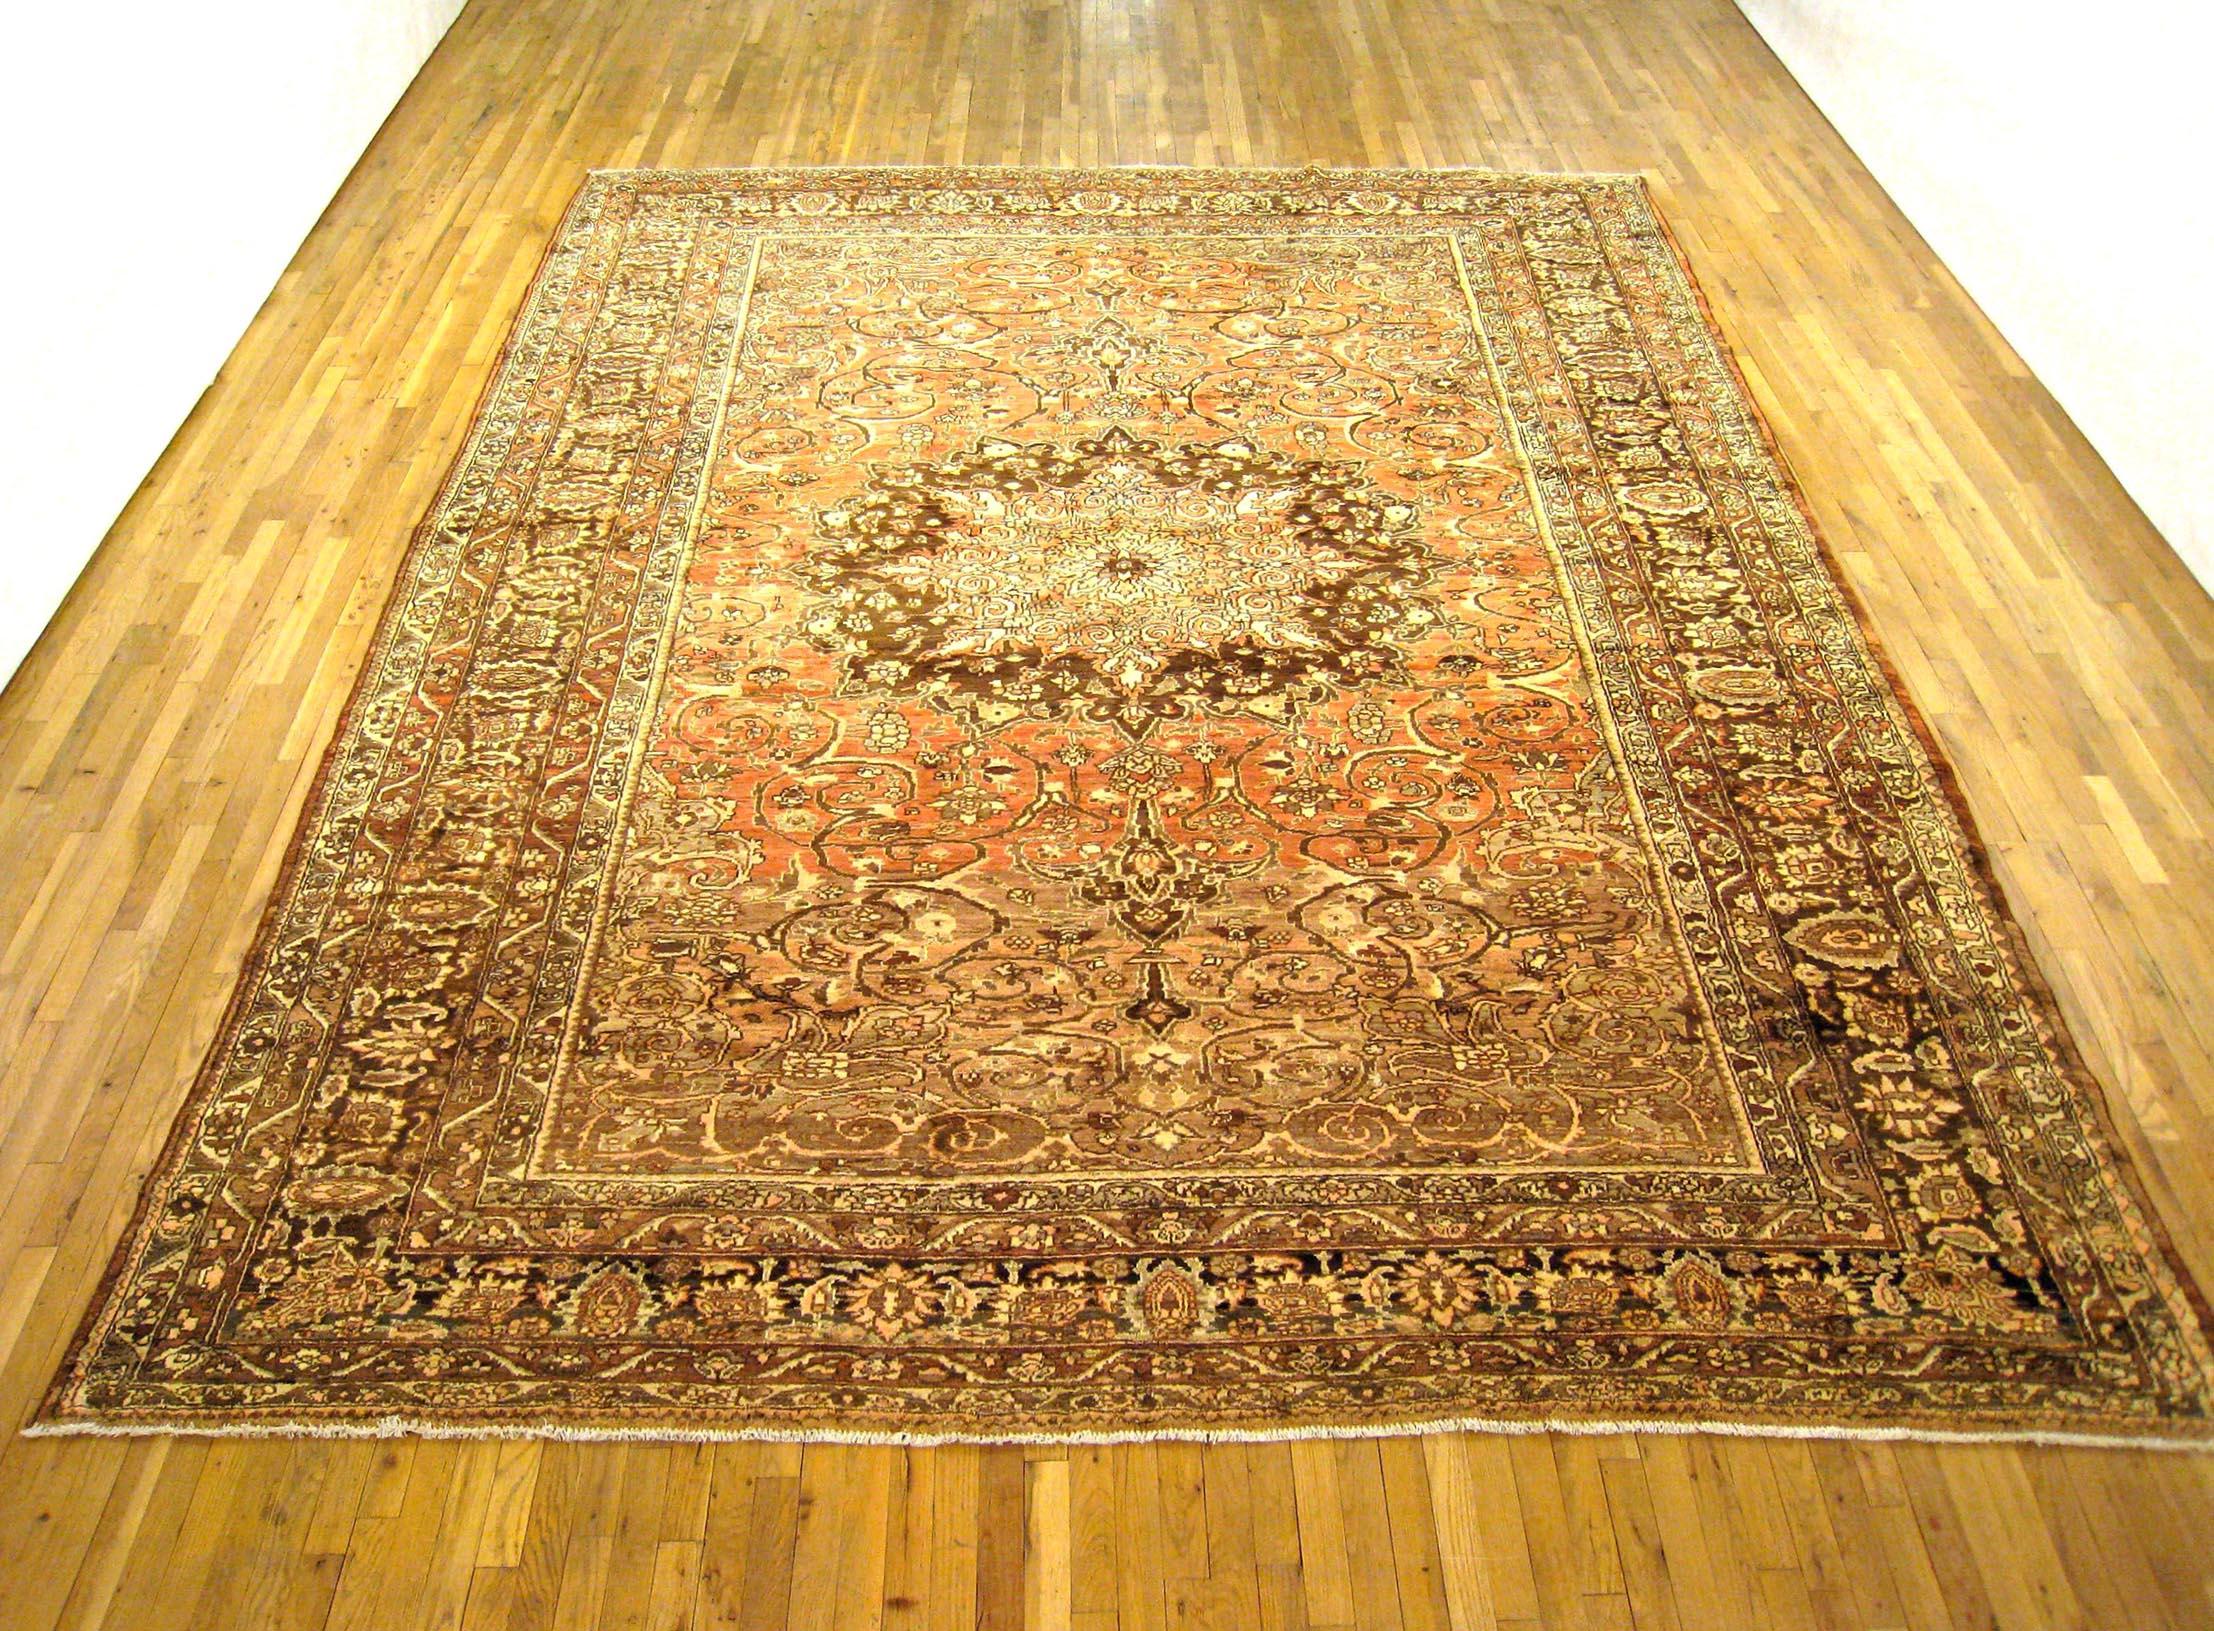 Antique Persian Baktiari Oriental rug, Room size

An antique Baktiari oriental rug, size 13'4 x 10'0, circa 1920. This handsome hand-woven geometric rug features a central medallion in the soft red field. The central field is enclosed within an